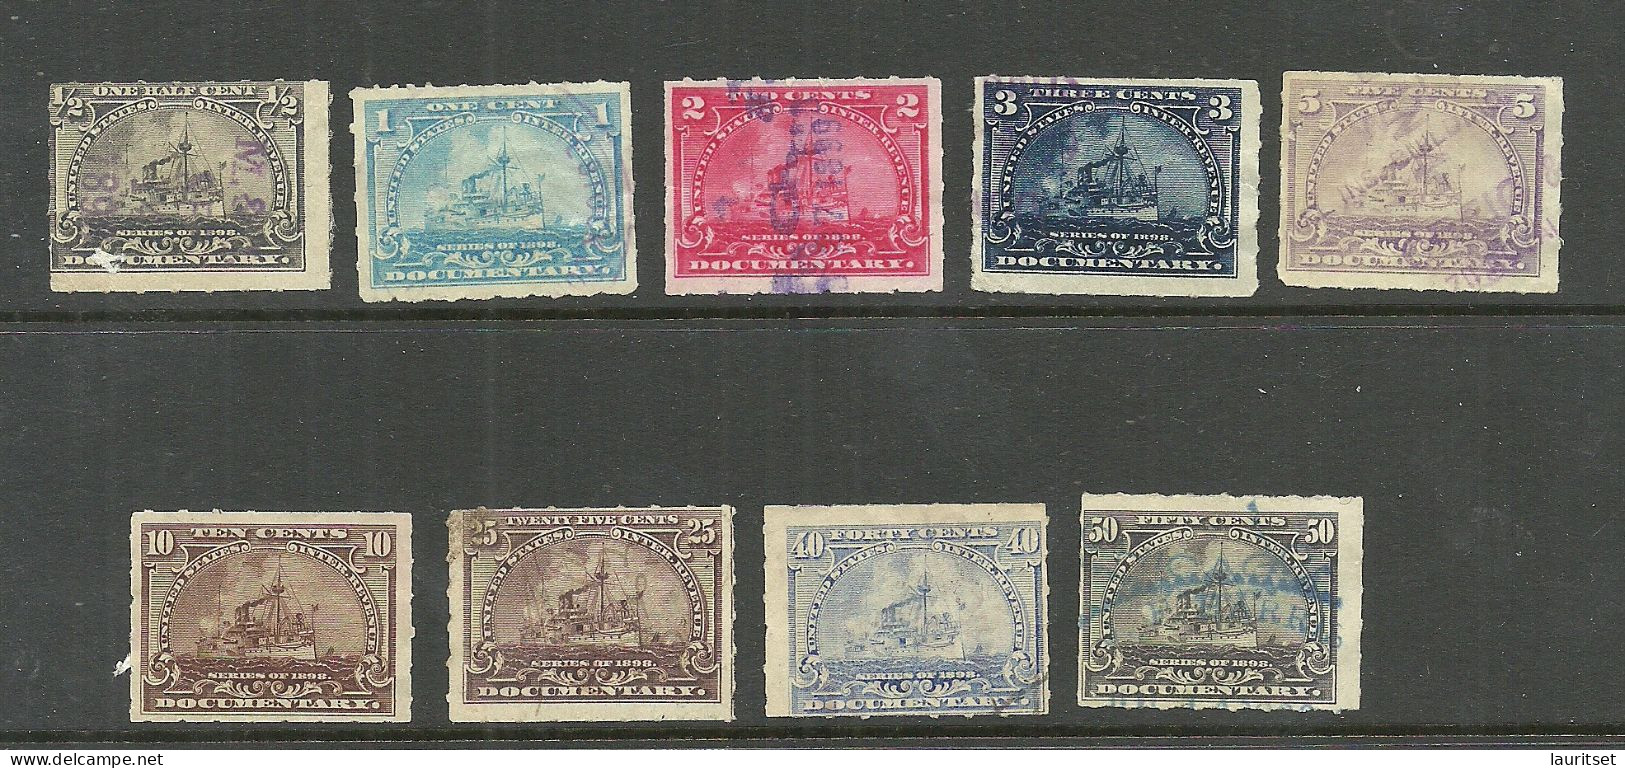 USA 1898 INTERNAL REVENUE DOCUMENTARY & Proprietary Stamps Ships, Mint & Used (mostly Used) - Steuermarken